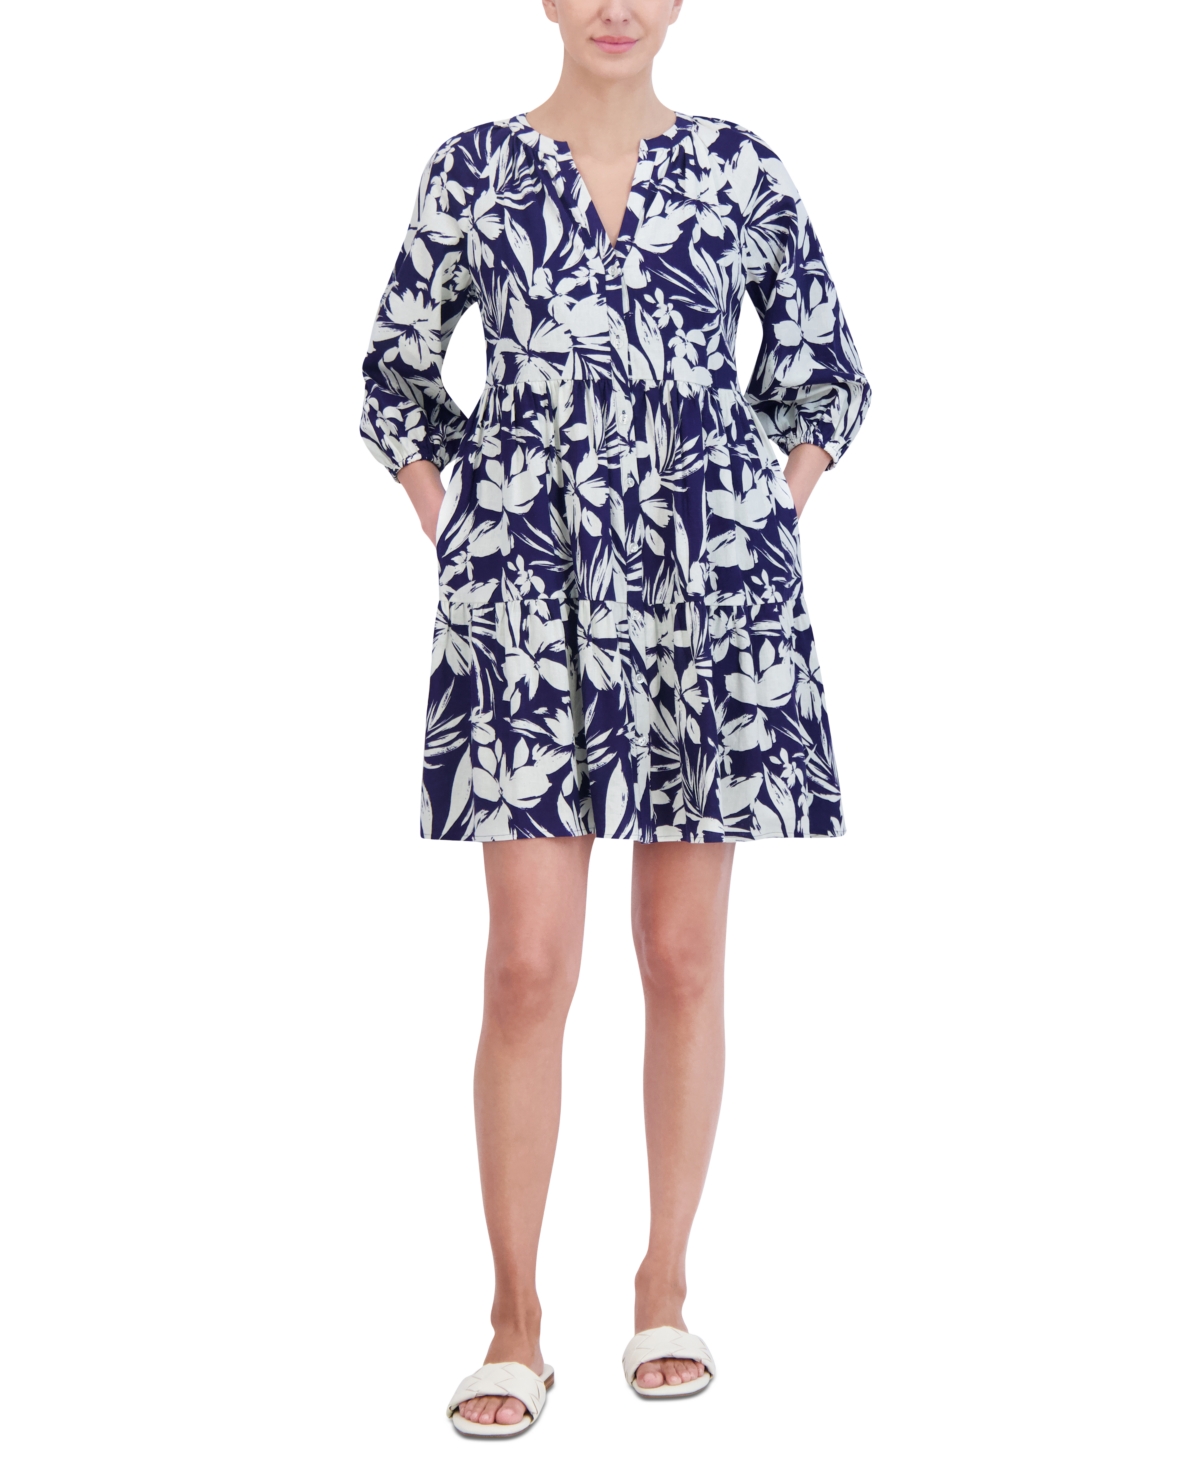 Petite Printed Button-Front A-Line Dress - Navy/White